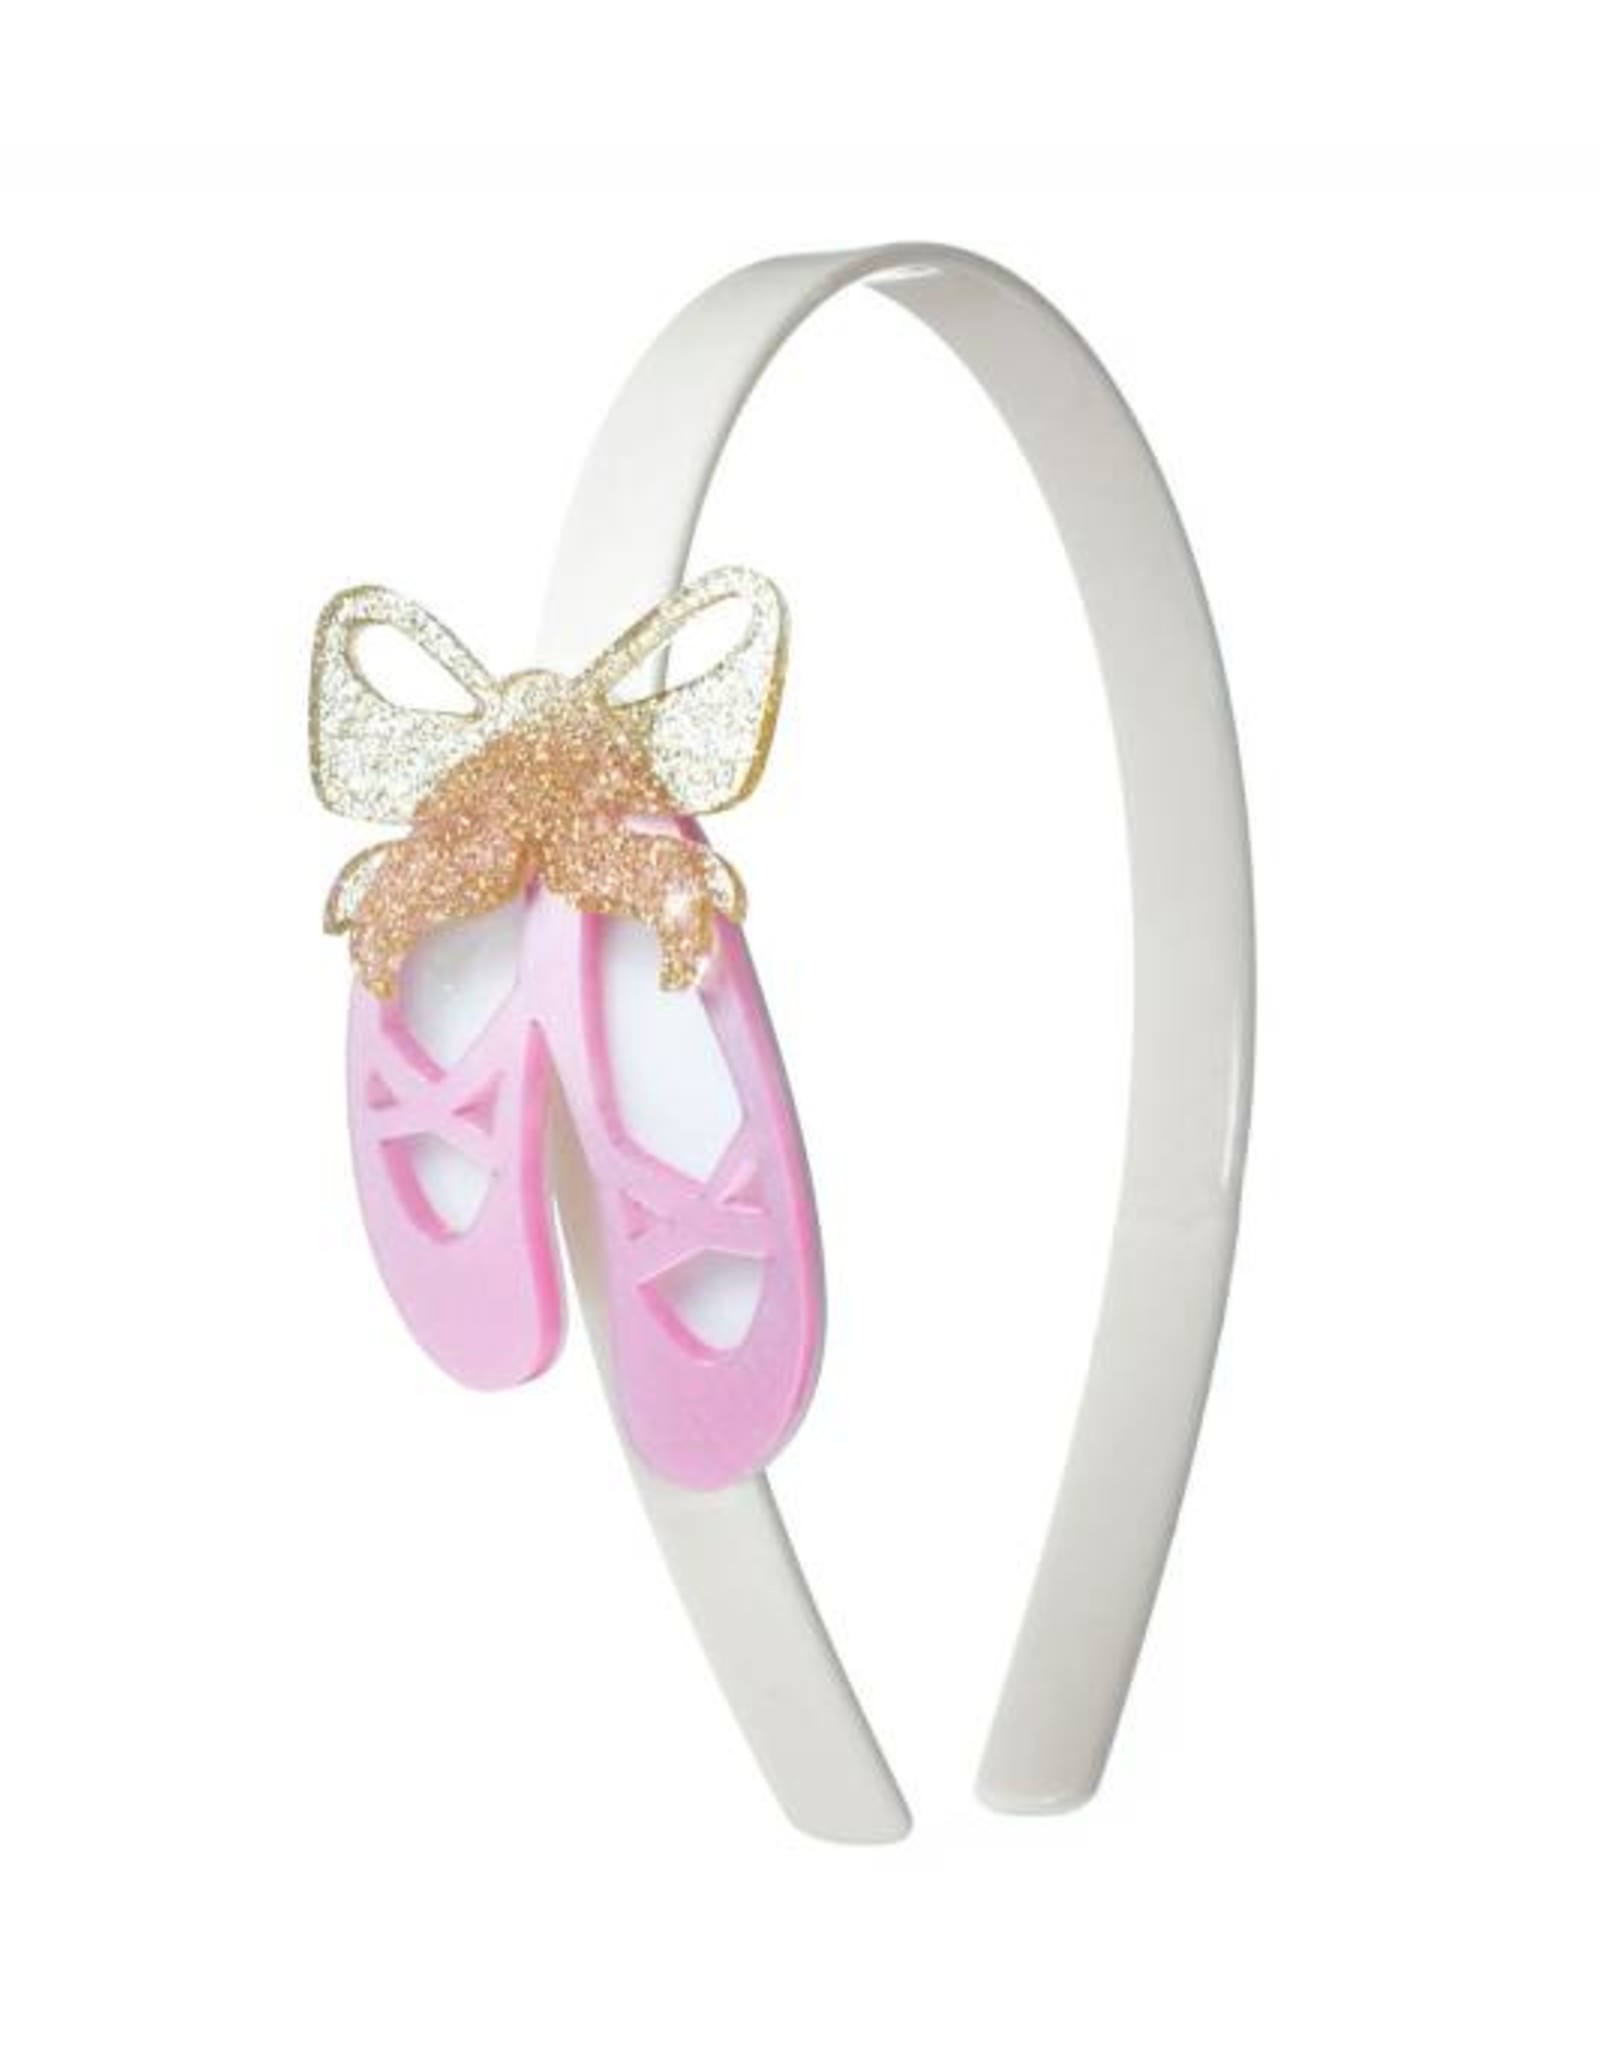 Lilies & Roses HB ballet slippers